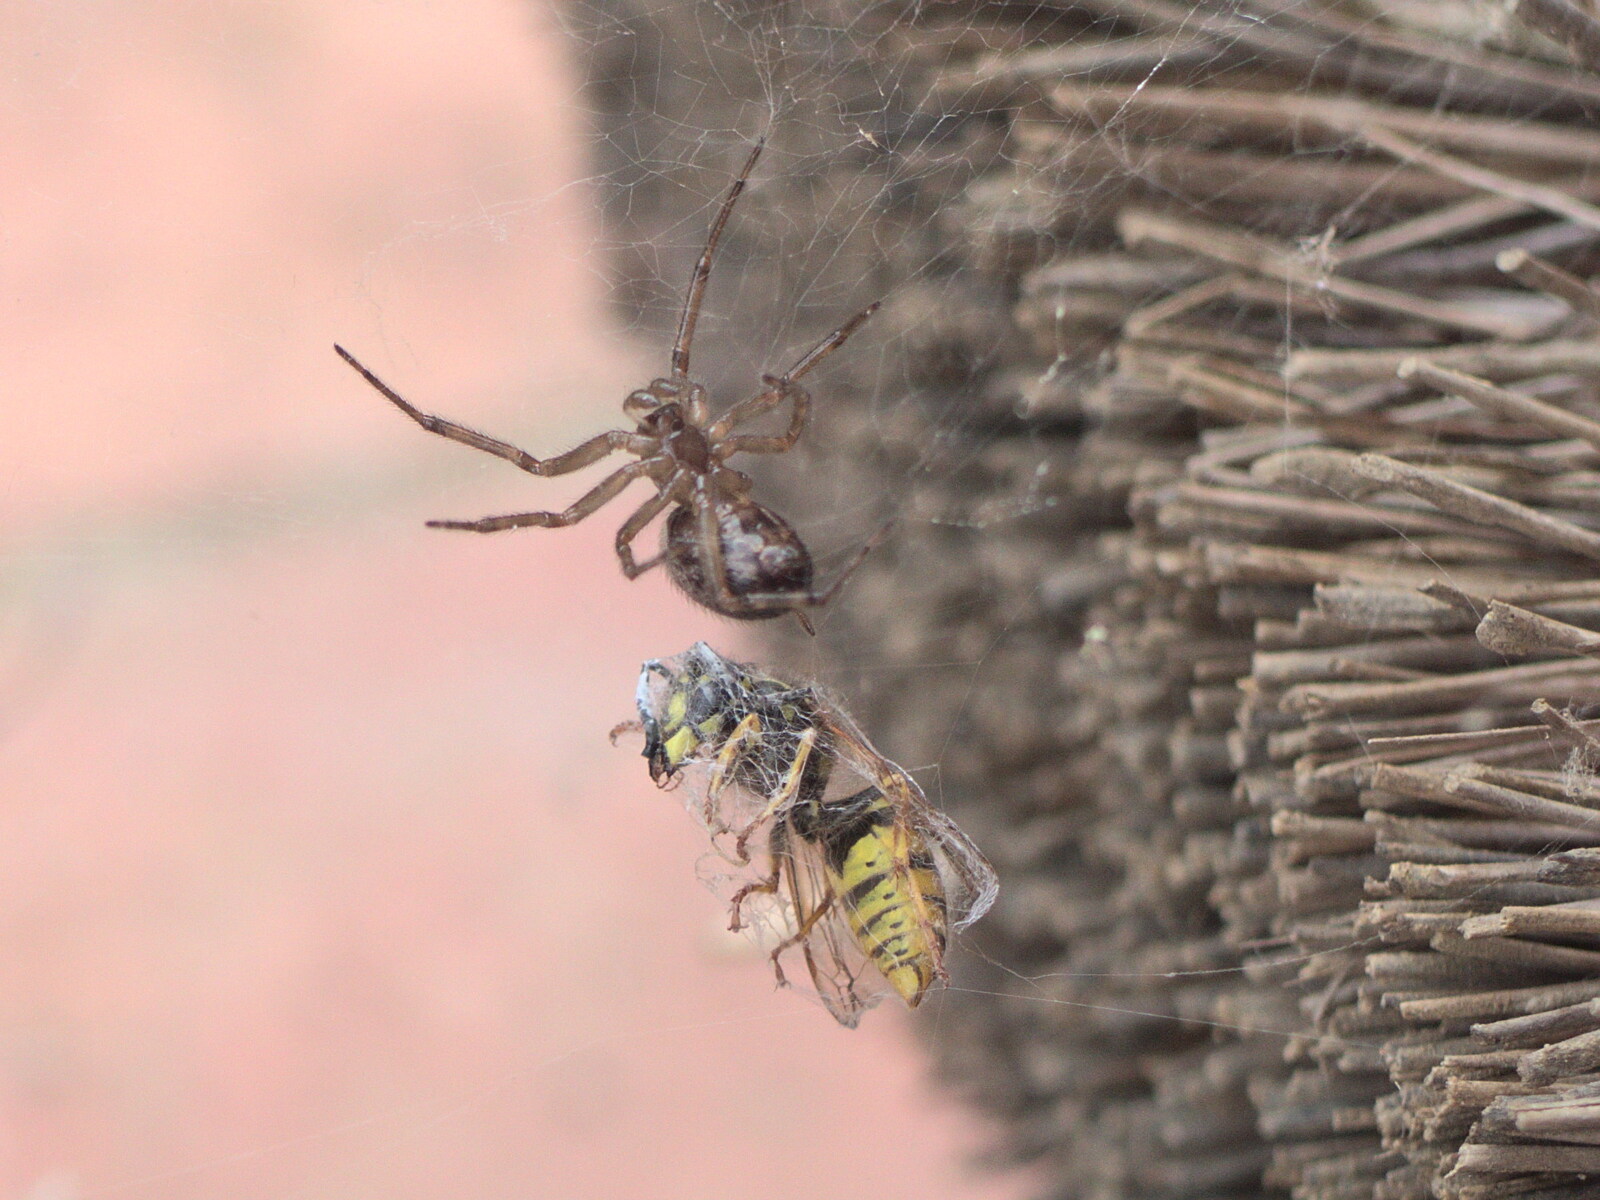 A July Miscellany, Diss, Eye and Norwich - 23rd July 2022: Battle of the predators: spider versus wasp